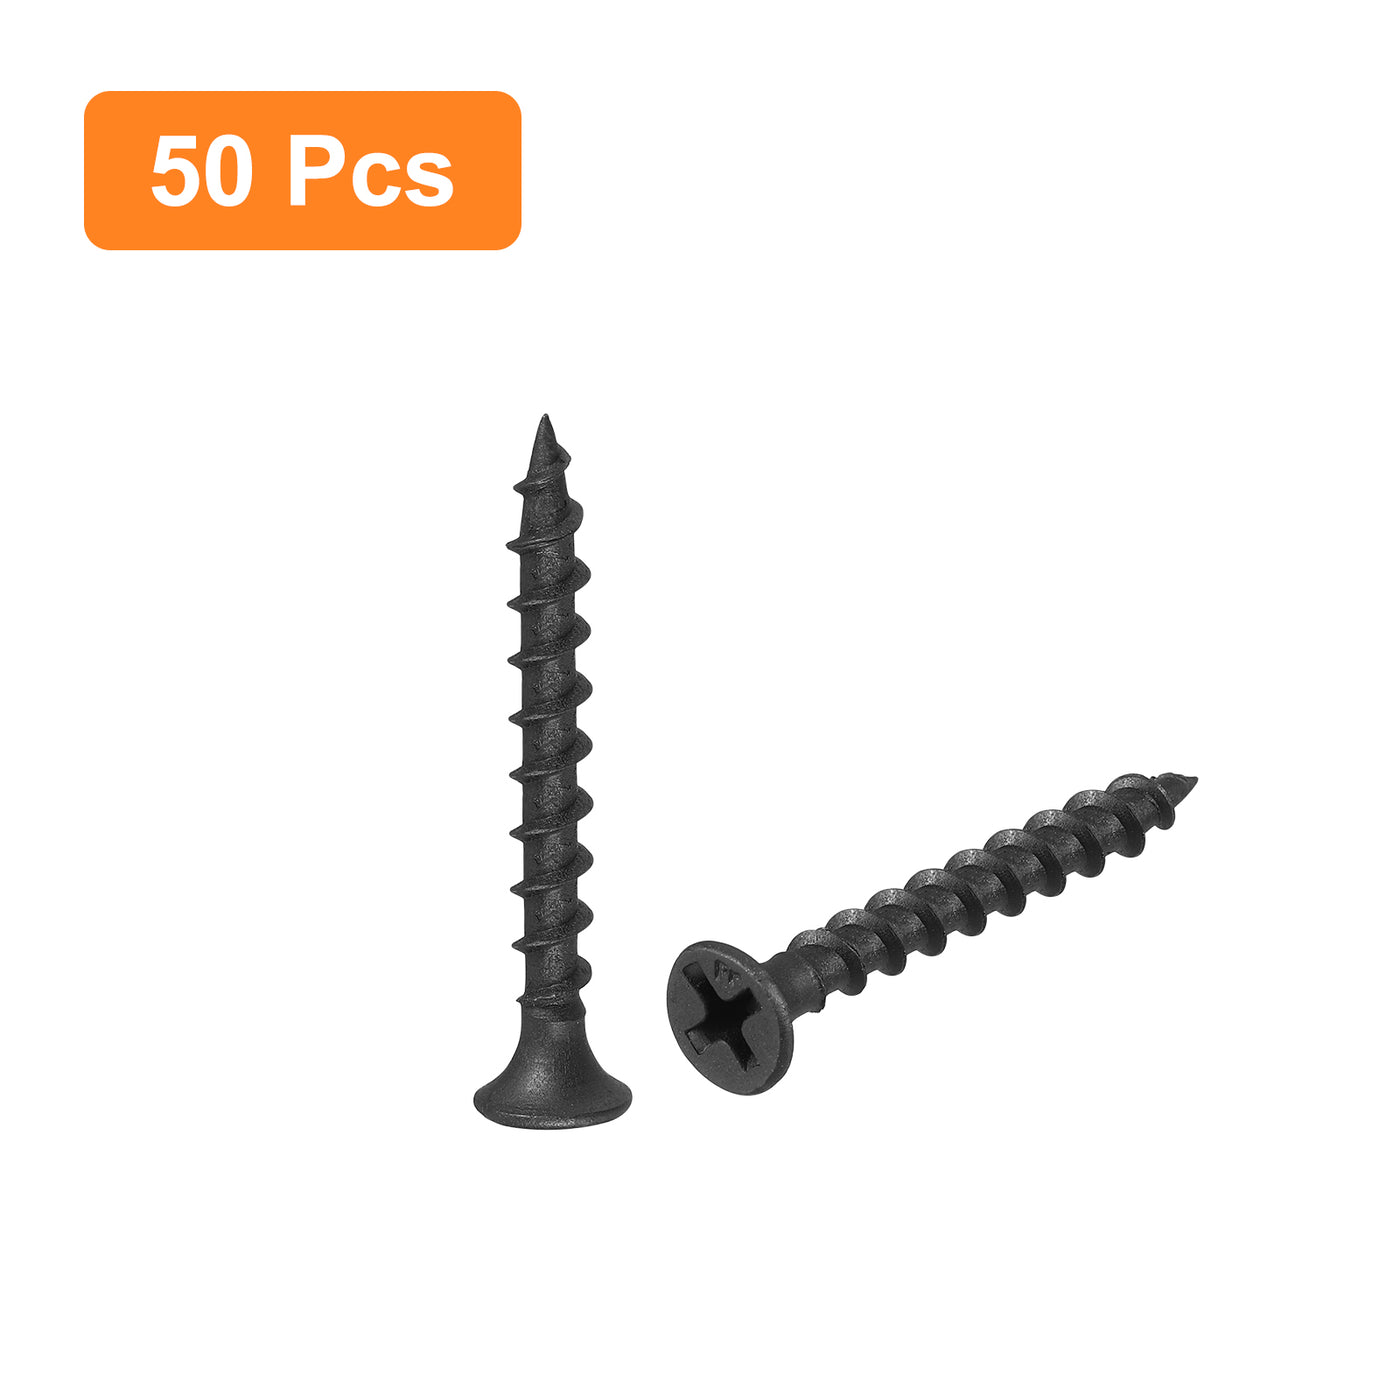 uxcell Uxcell M3.8x35mm 50pcs Phillips Drive Wood Screws, Carbon Steel Self Tapping Screws